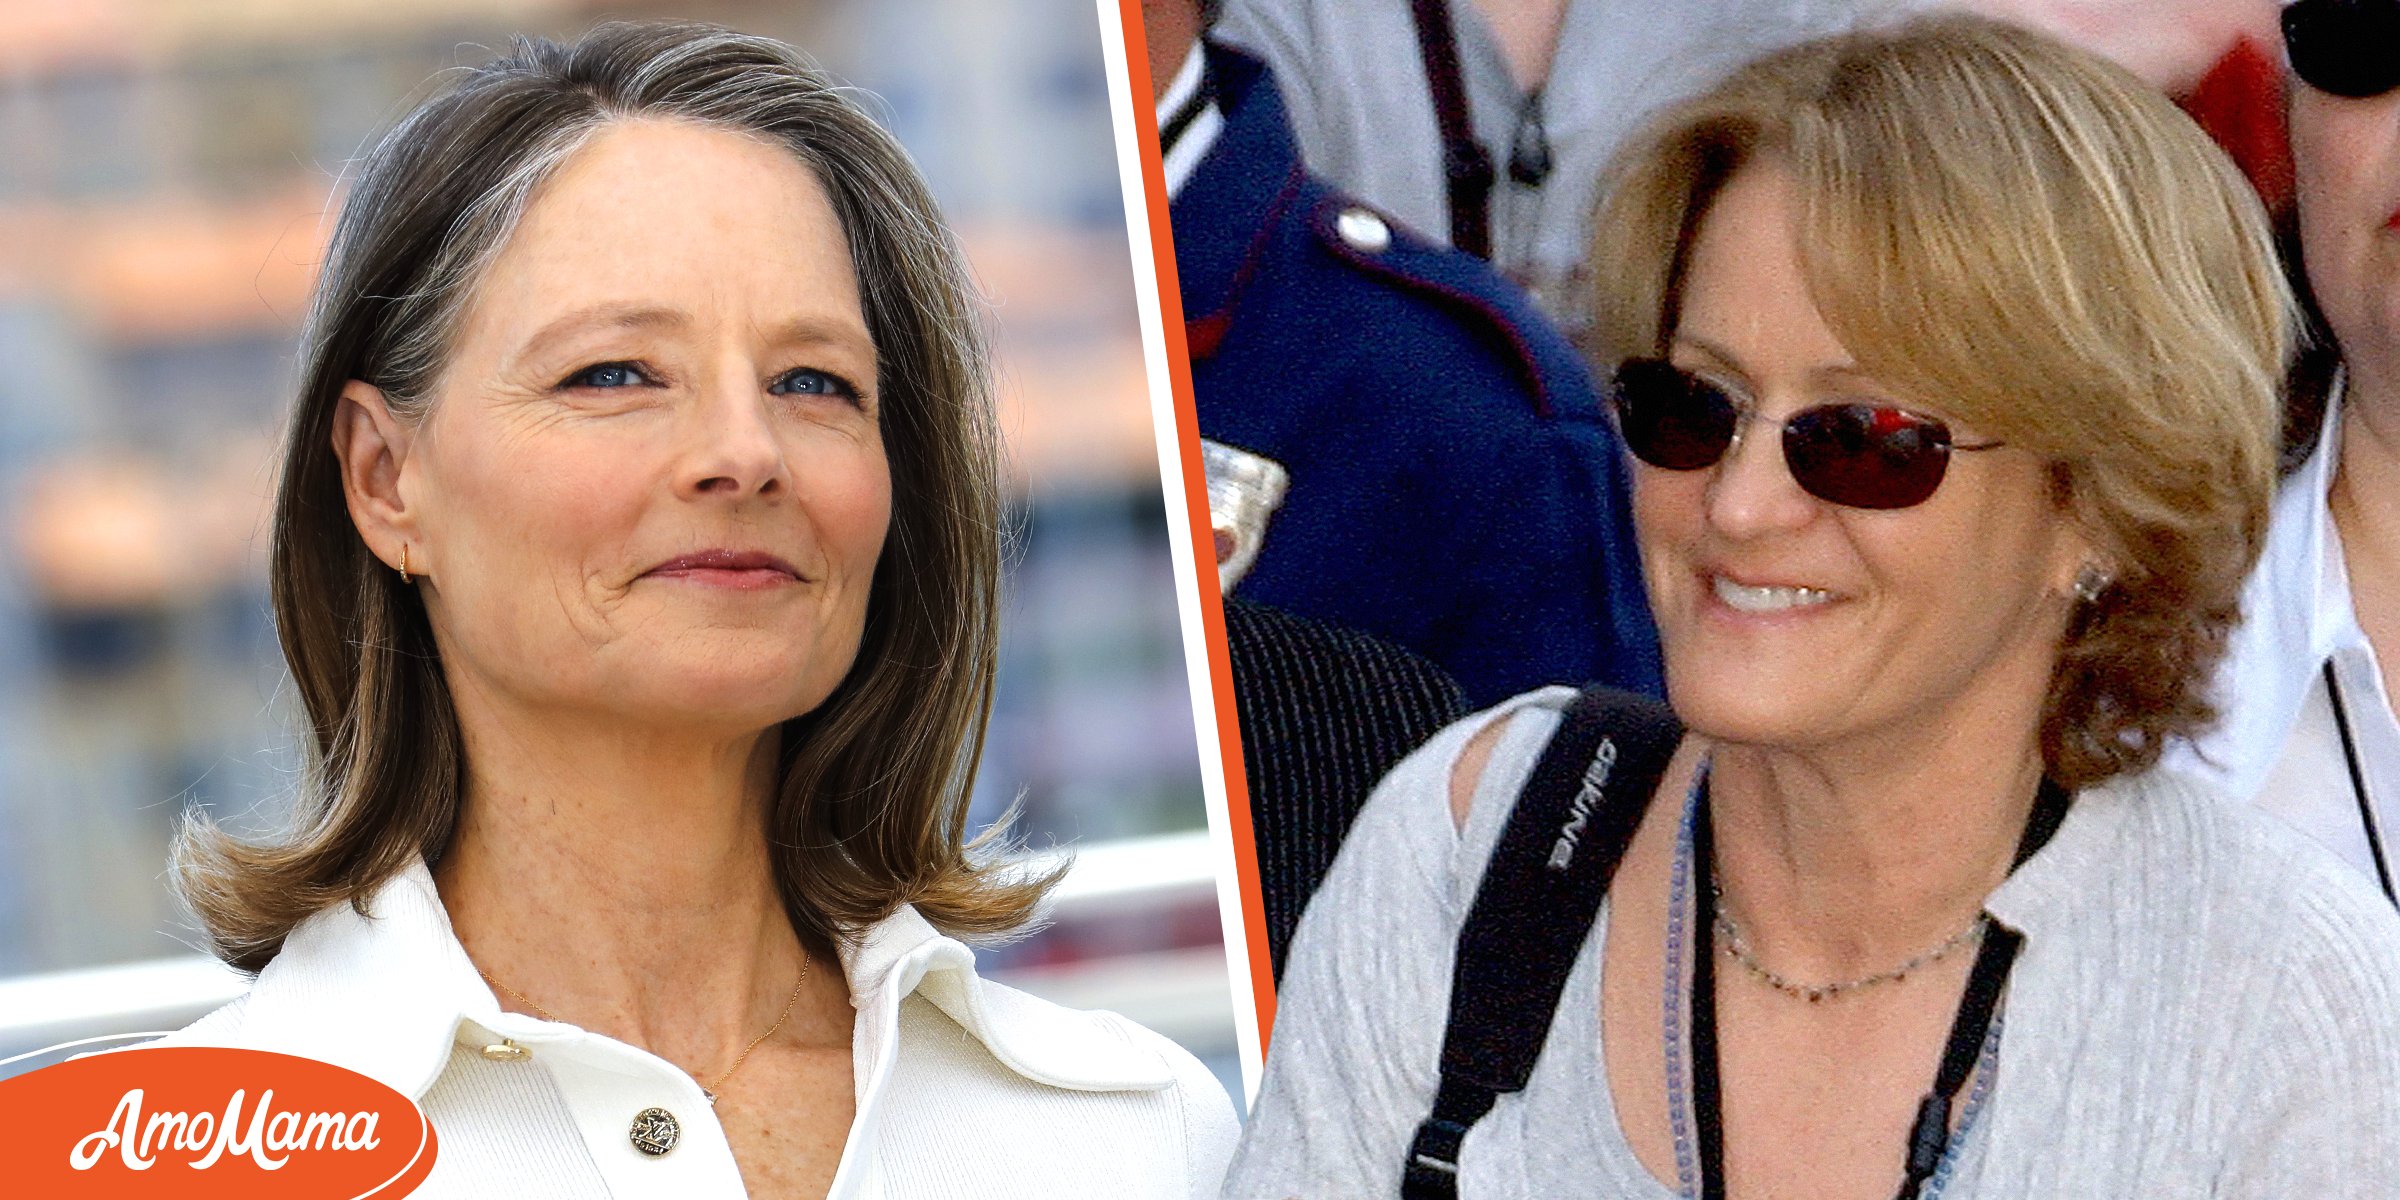 Cydney Bernard Was Jodie Foster's Partner for 15 Years and They Share 2